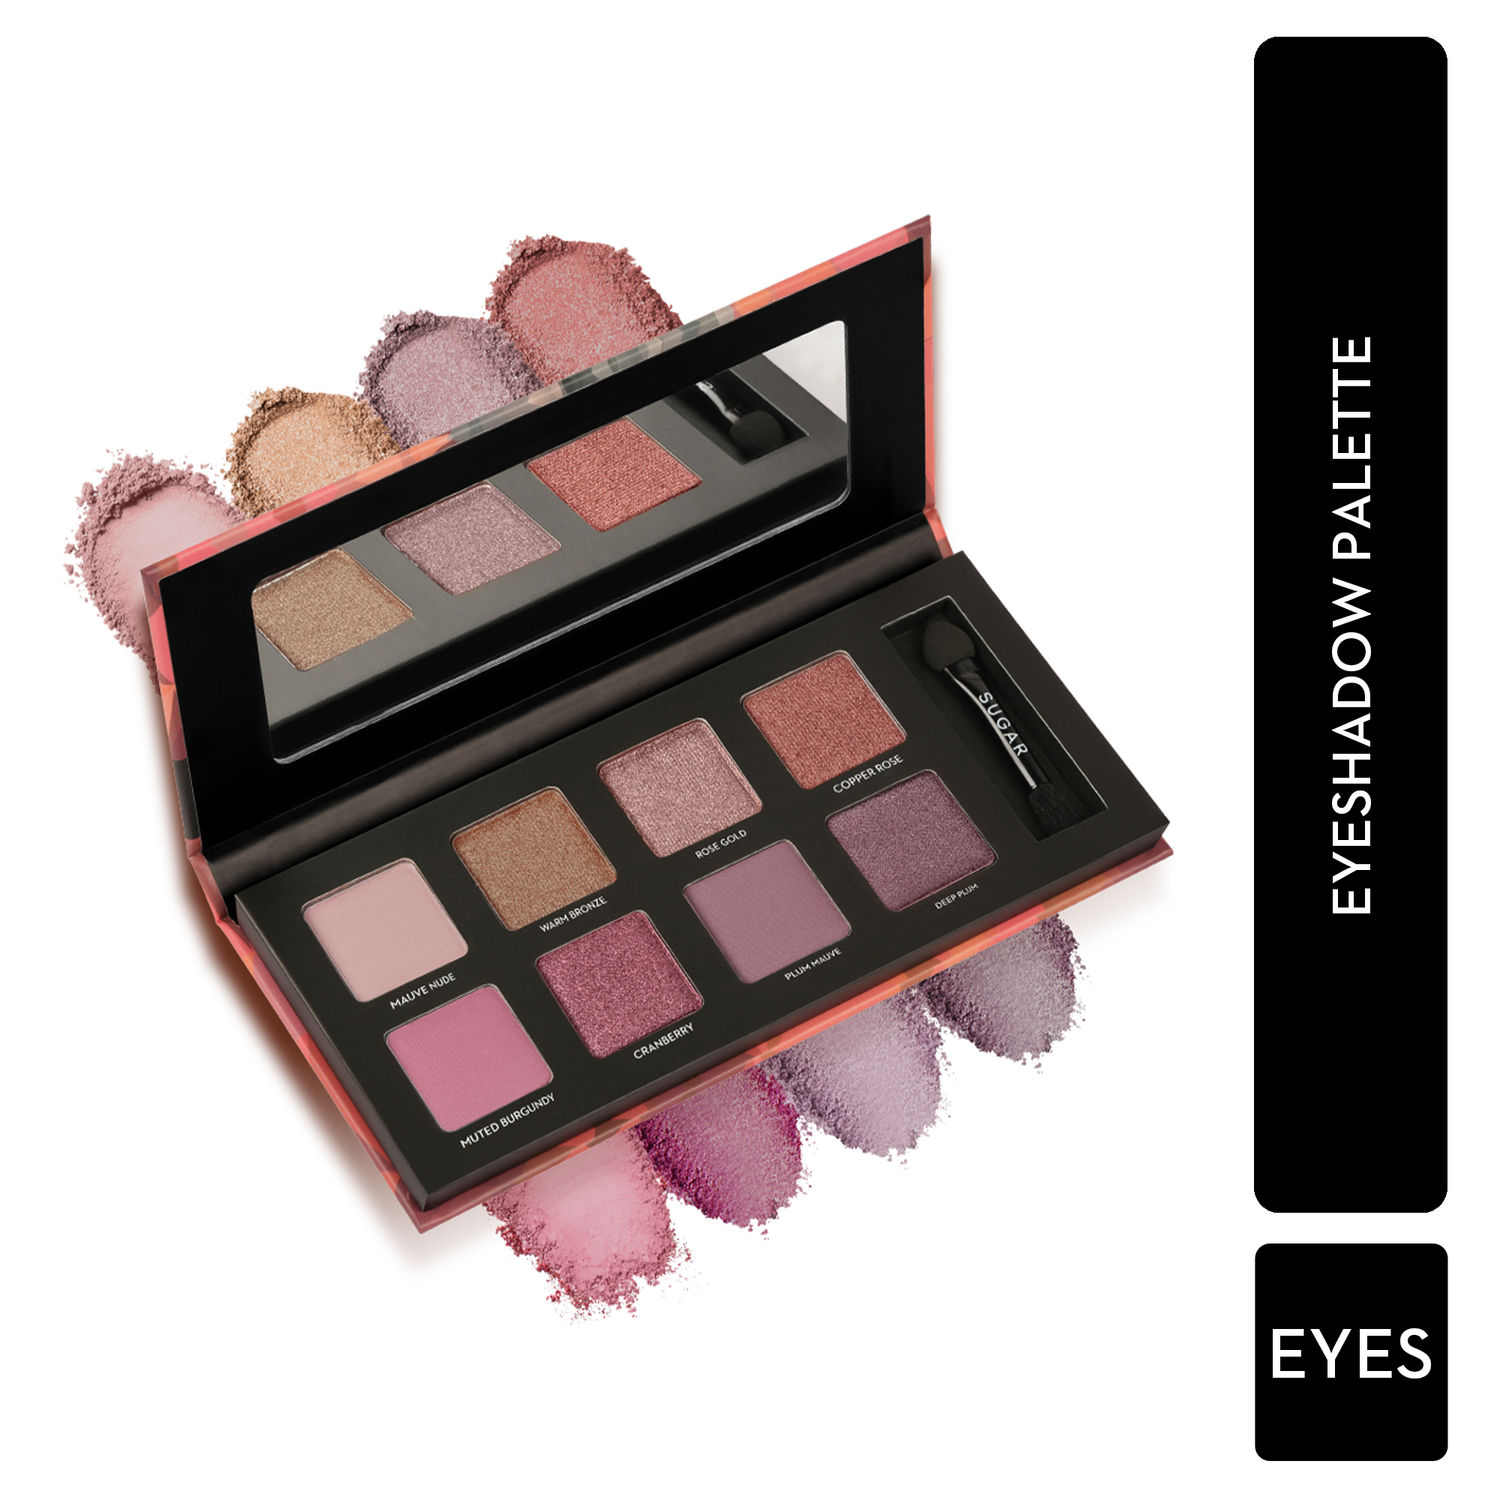 Buy SUGAR Cosmetics - Blend The Rules - Eyeshadow Palette - 03 Fantasy (8 Mauve Shades) - Long Lasting, Smudge Proof Eyeshadow for Smoky Eye Look, Paraben-Free - Purplle